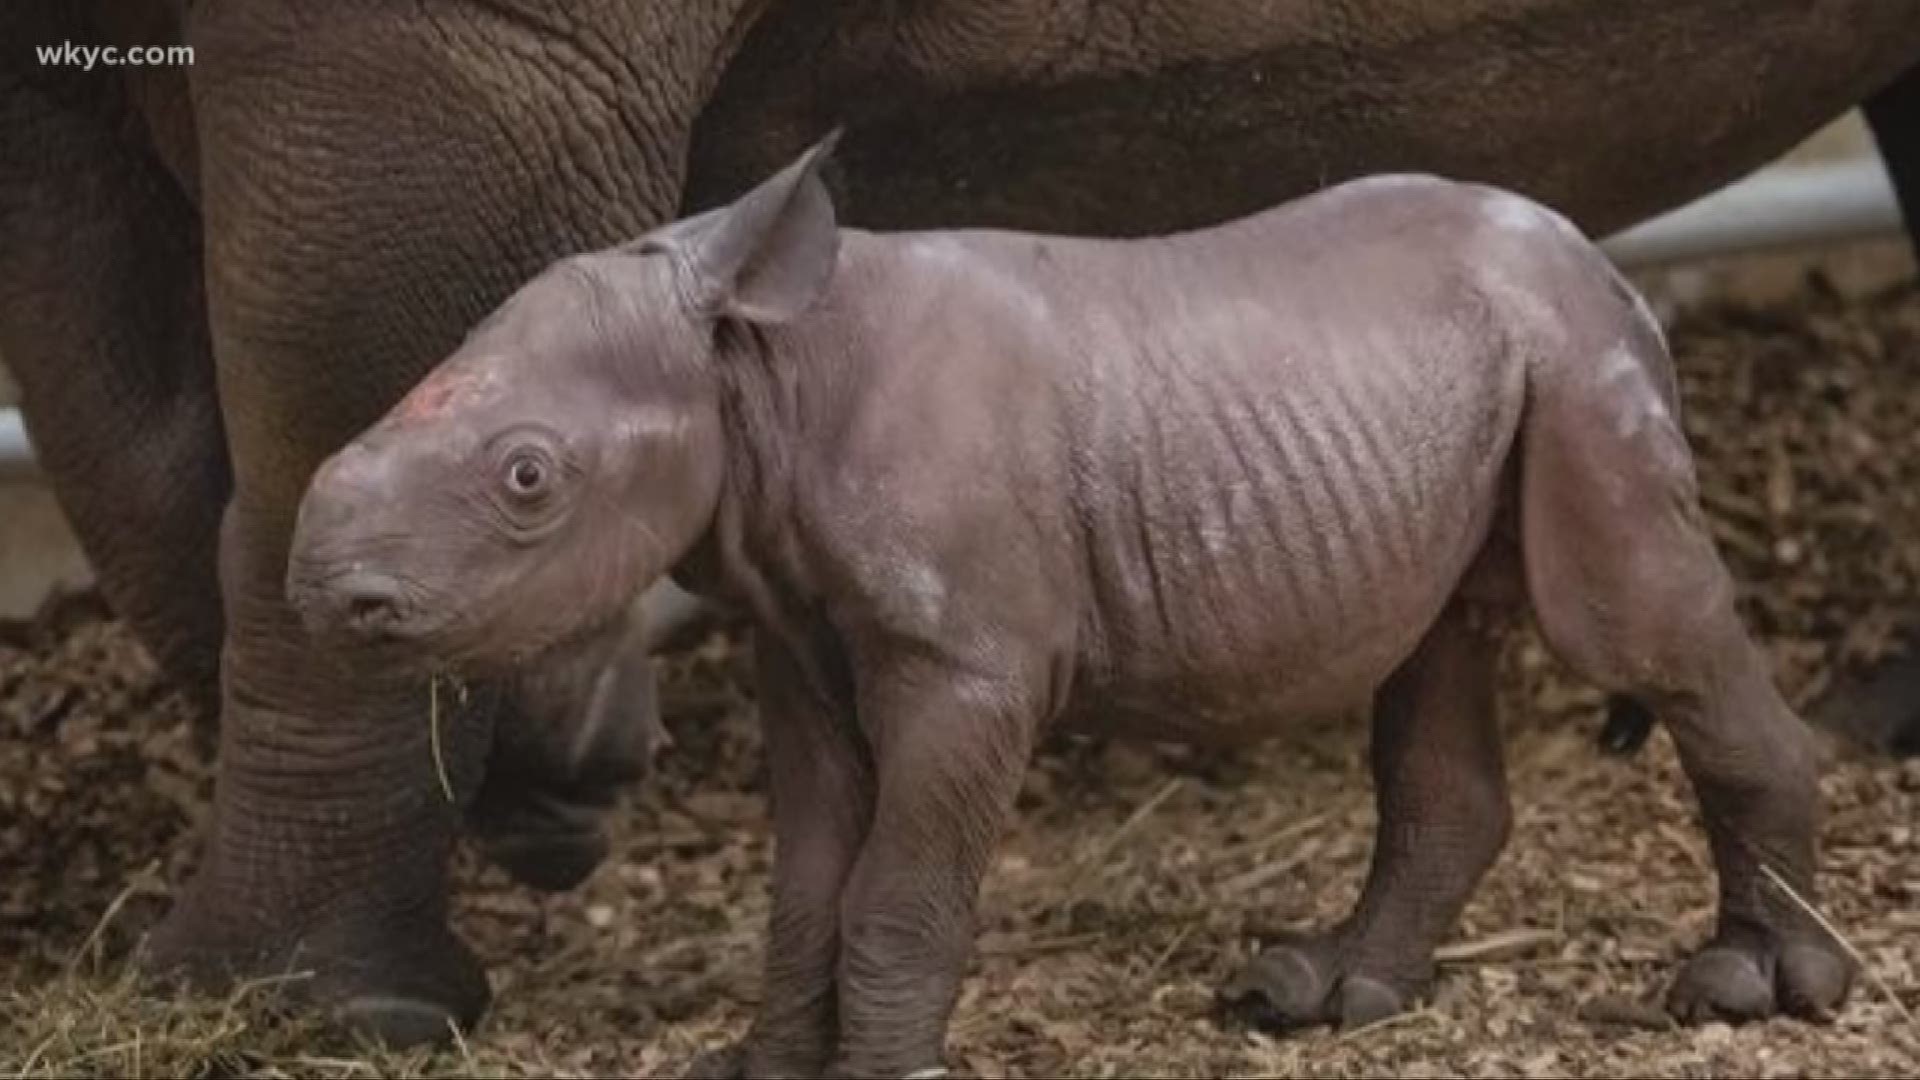 Cleveland Metroparks Zoo welcomes baby